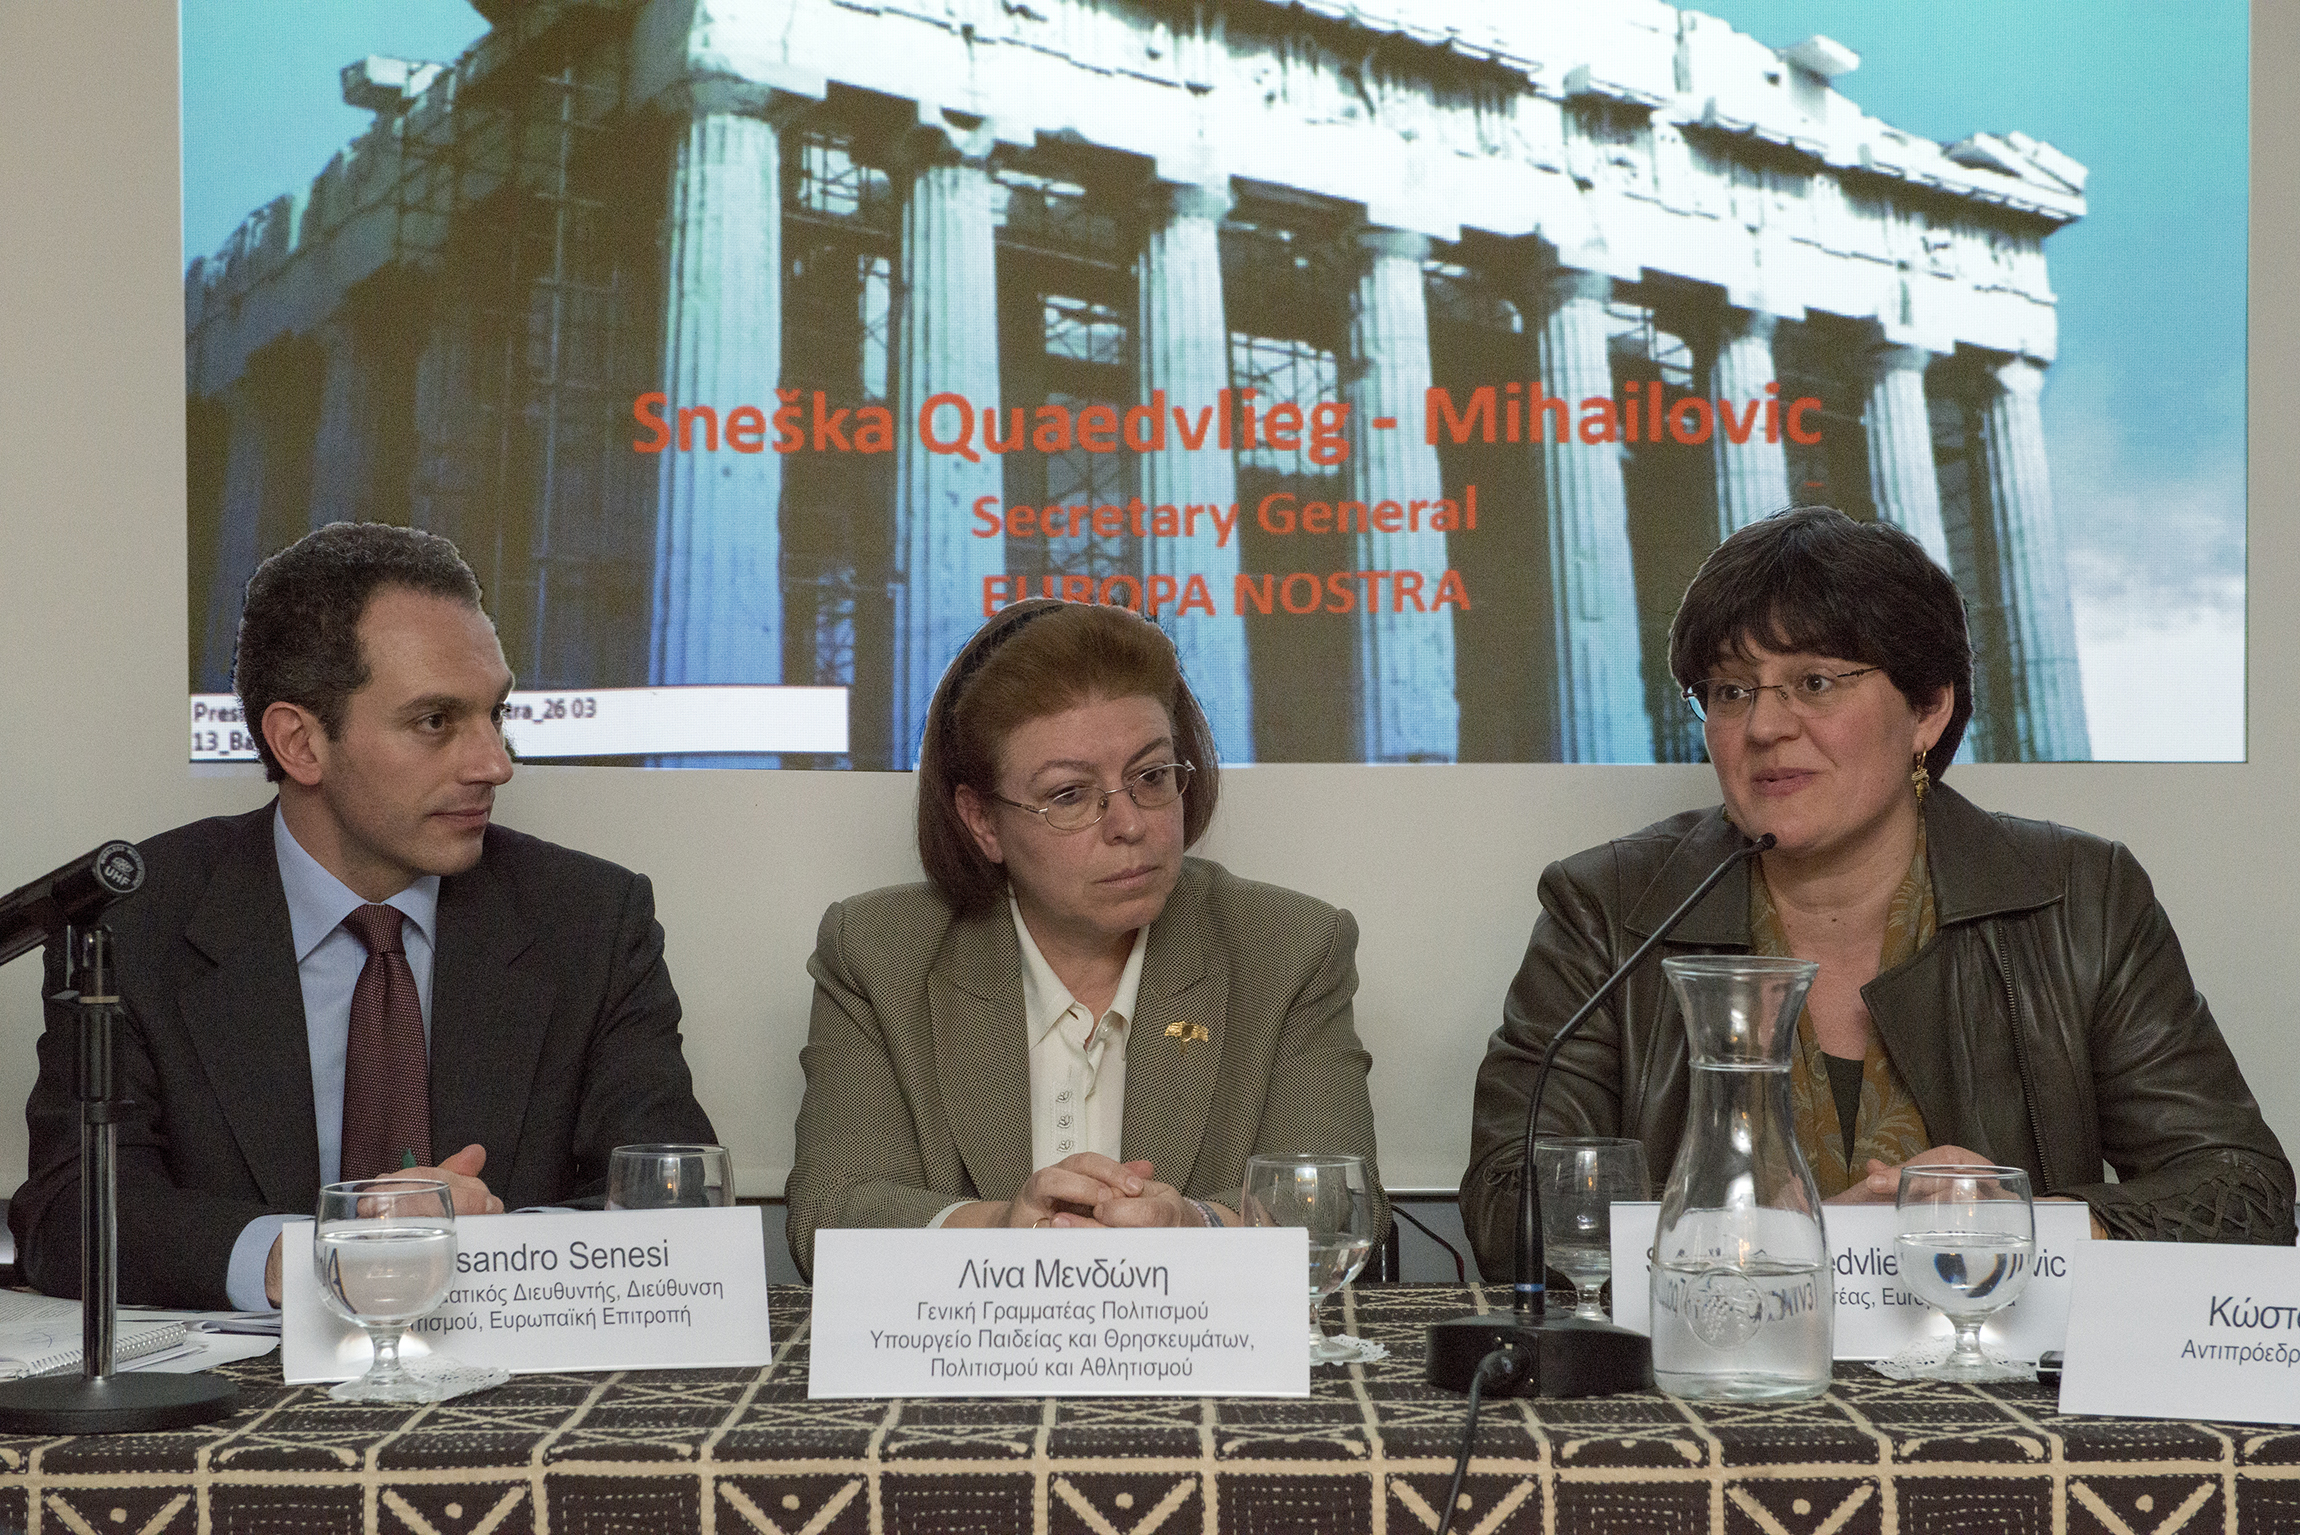 Alessandro Senesi, Deputy Head of Unit from the DG Education and Culture of the European Commission; Lina Mendoni, Secretary General for Culture of the Hellenic Ministry for Religious Affairs, Education, Culture and Sports; Sneška Quaedvlieg-Mihailović, Secretary General of Europa Nostra.